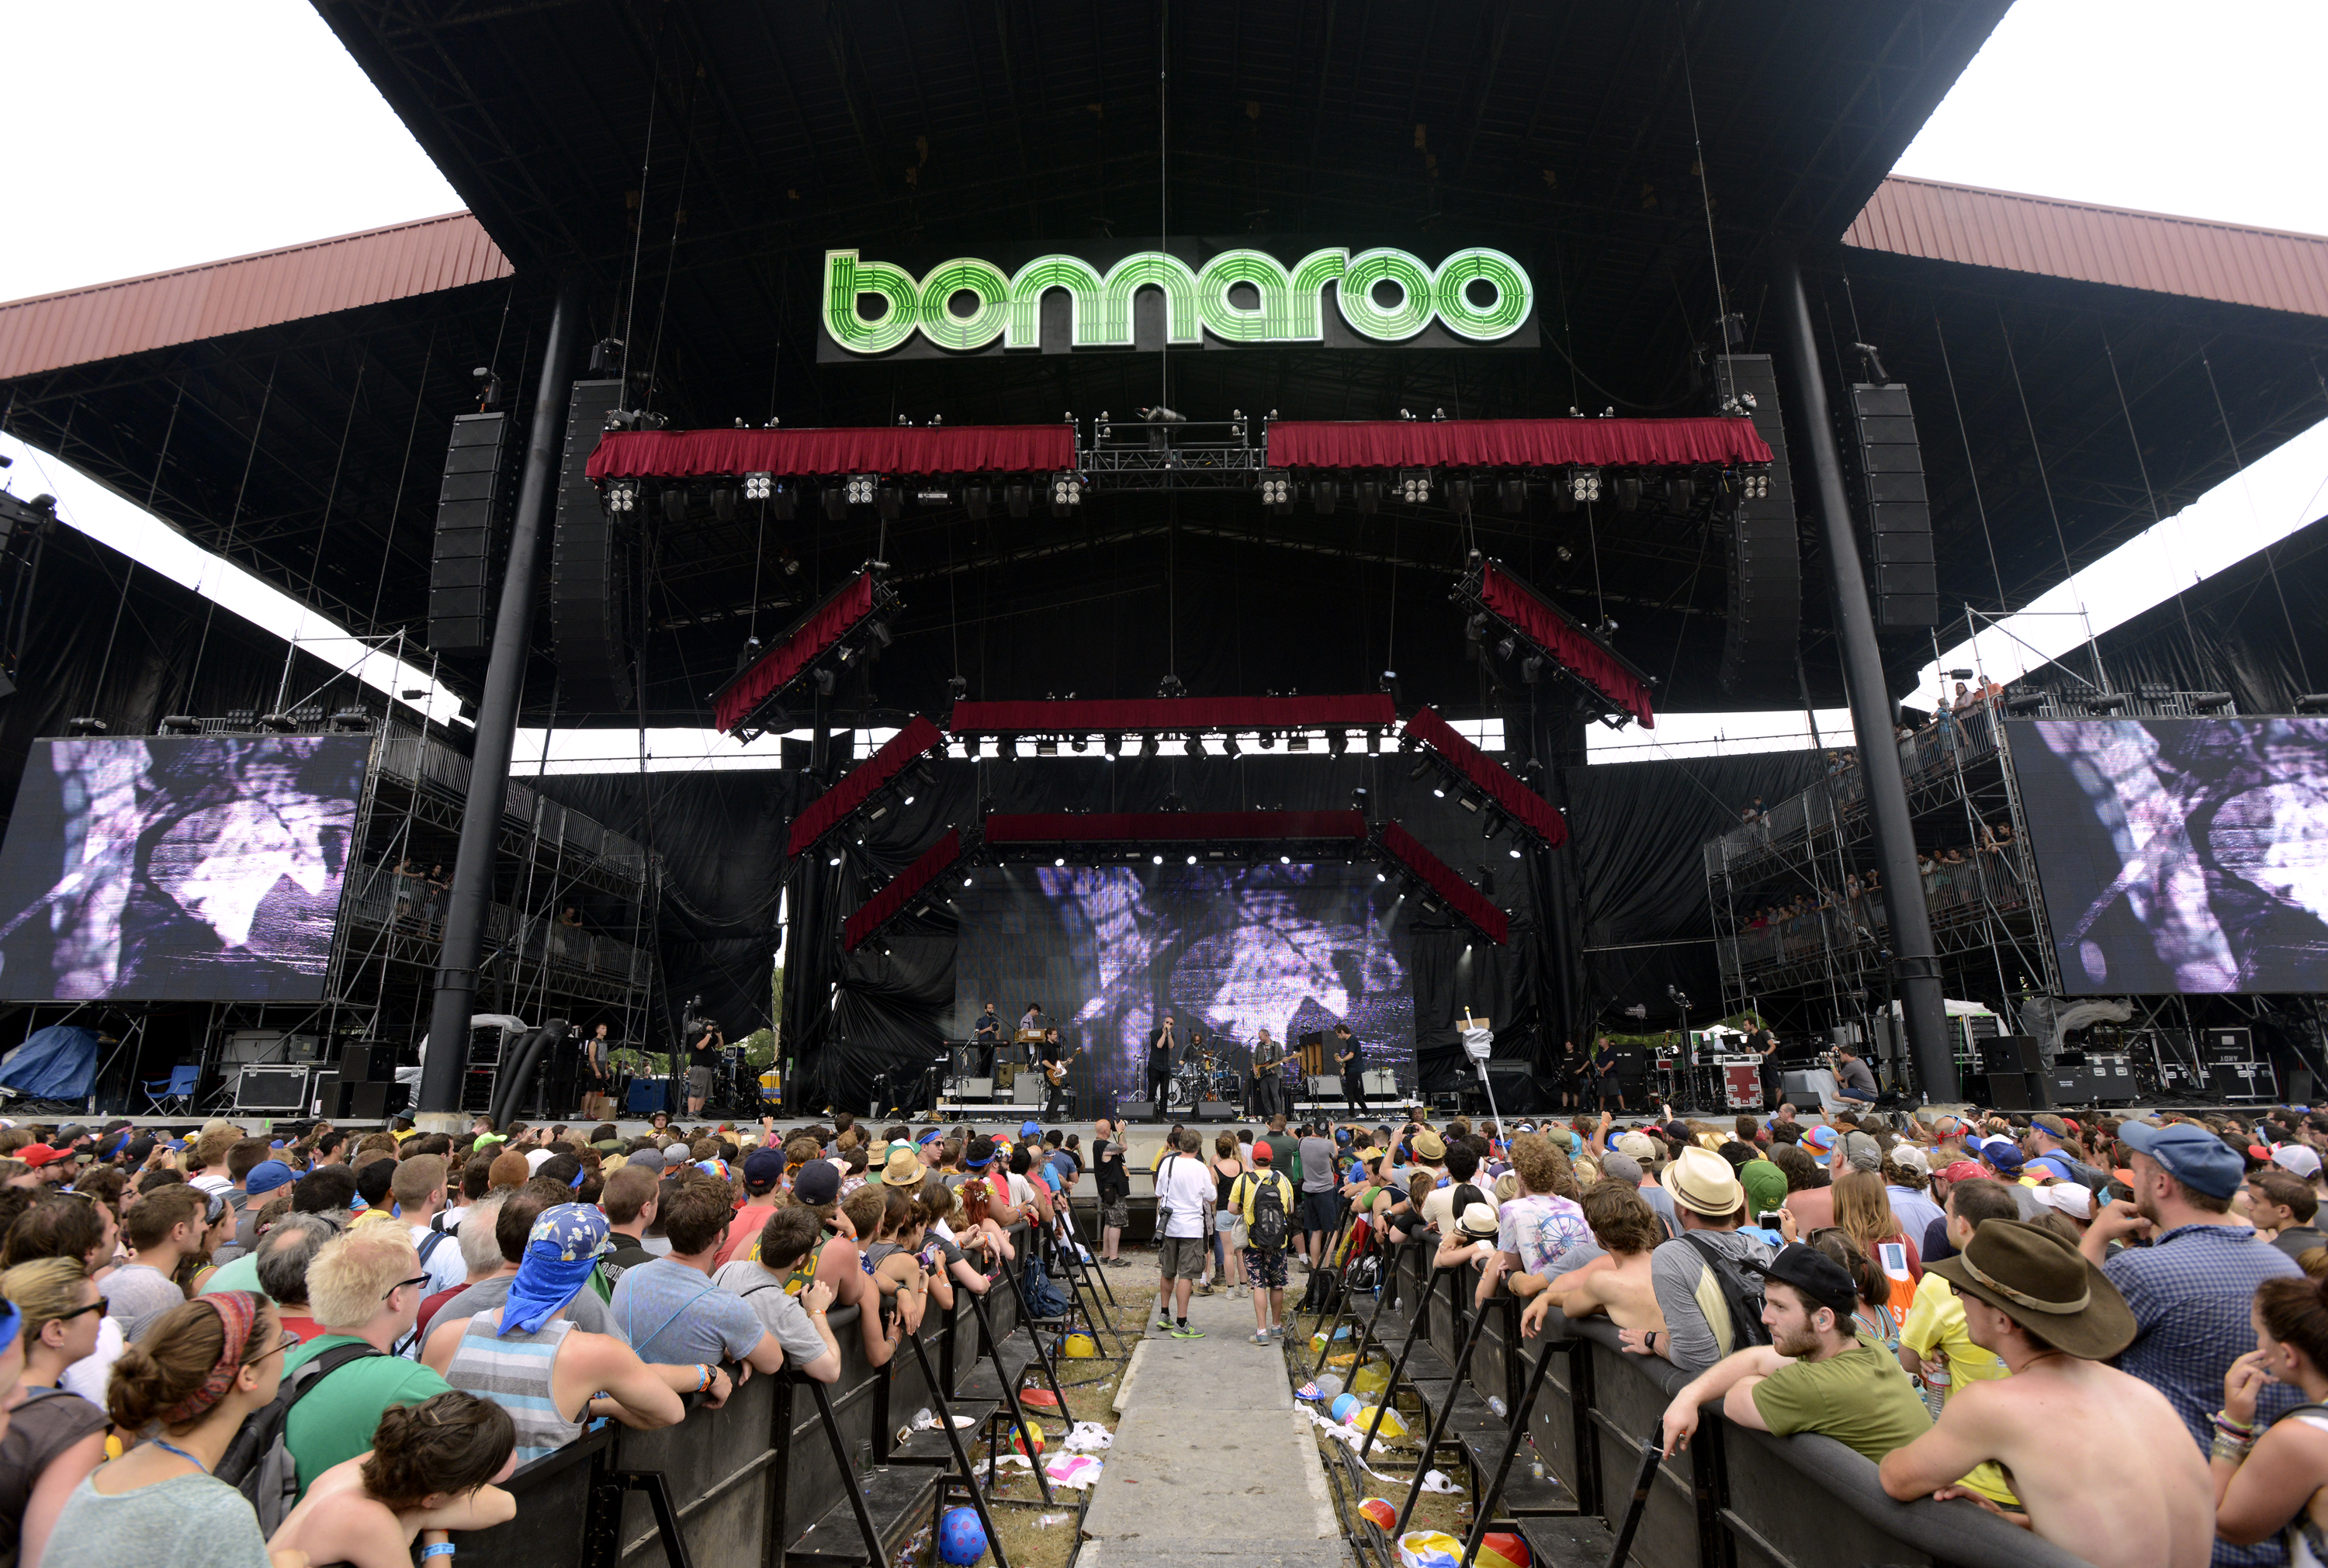 Matt Berninger and The National perform as part of Day 4 of the Bonnaroo Music And Arts Festival on June 16, 2013 in Manchester, Tn. (Tim Mosenfelder—Getty Images)